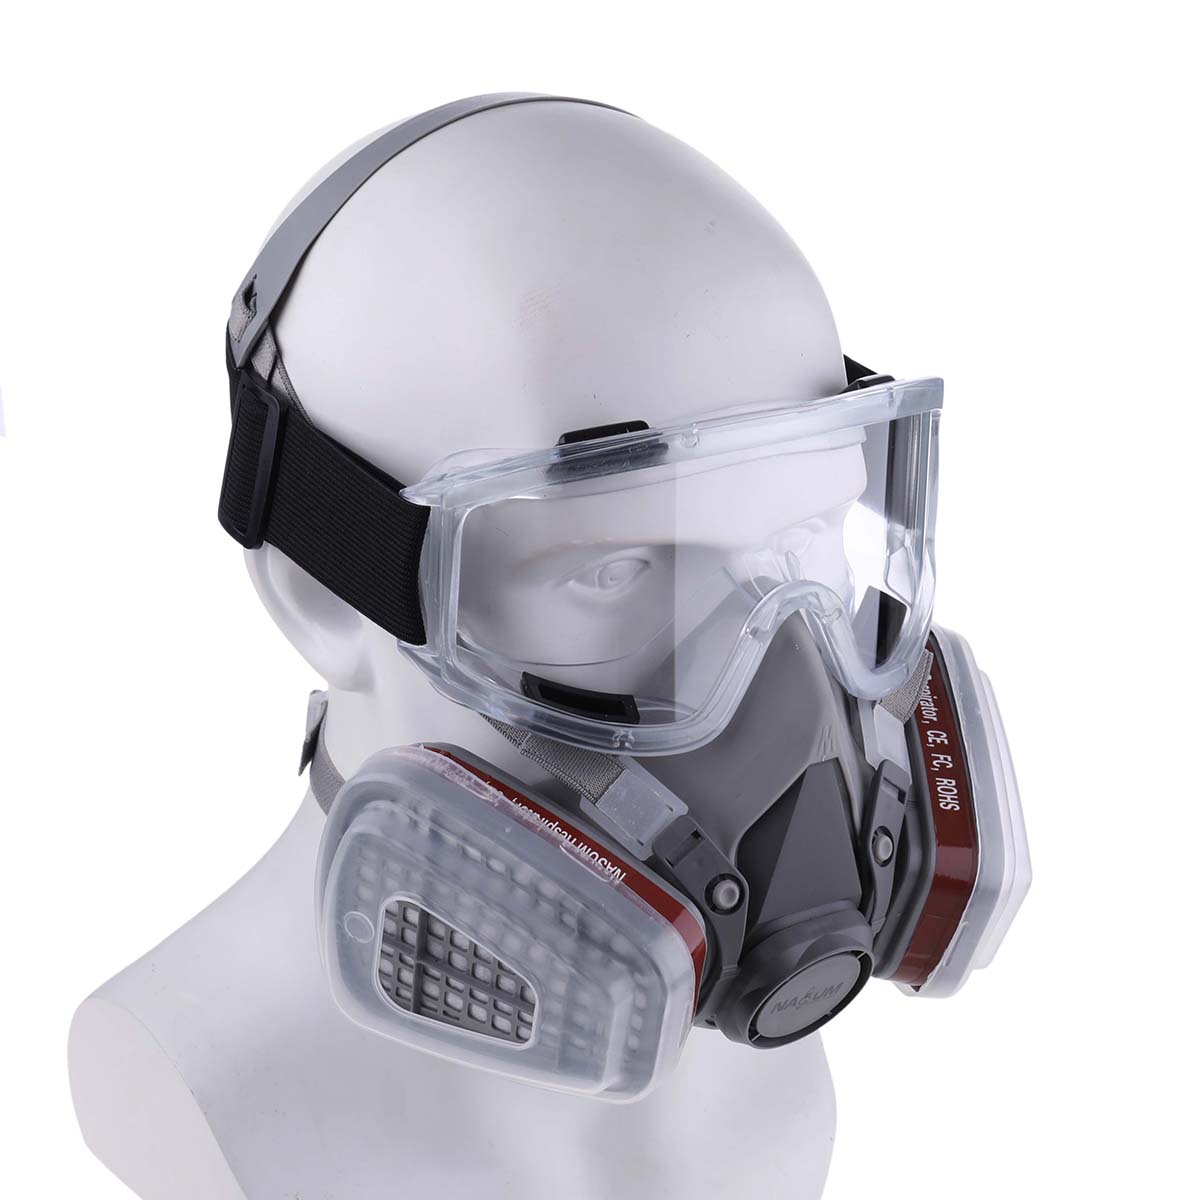 NASUM-Respirator-Mask-with-Protective-Goggles-for-Paint-Spray-Dust-Chemicals-Protection-Odour-Contro-1595188-9